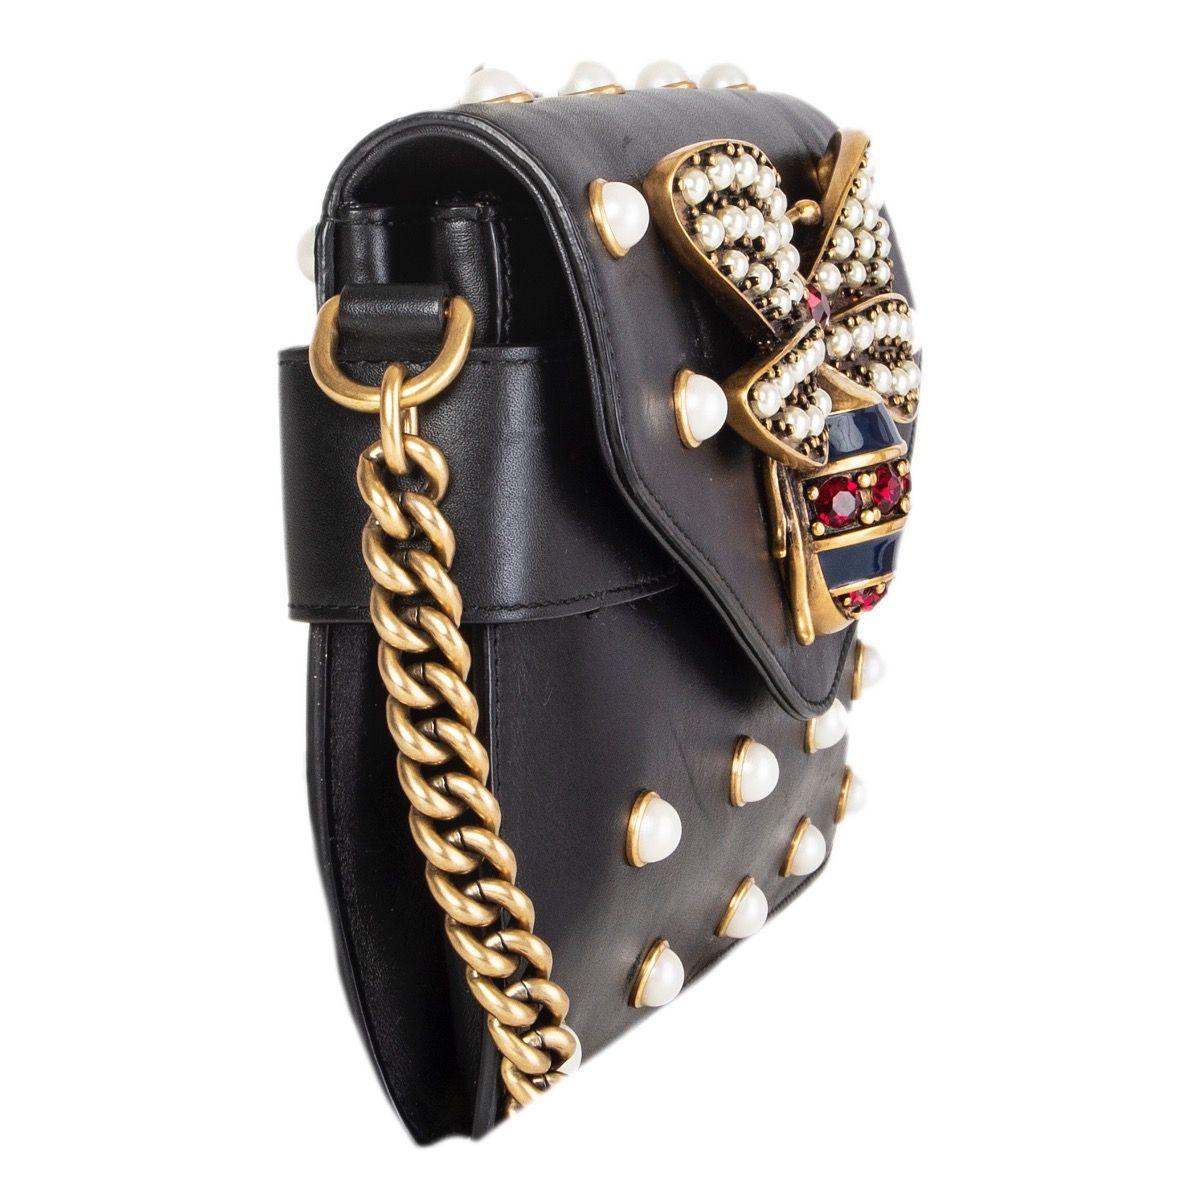 Gucci 'Broadway Pearly Bee' shoulder bag in black calfskin embellished with a antique gold-tone metal bee, pearls and crystals. Features chain link strap and blue, red and white singnature Web shoulder strap. Its flap closure opens to a tan leather